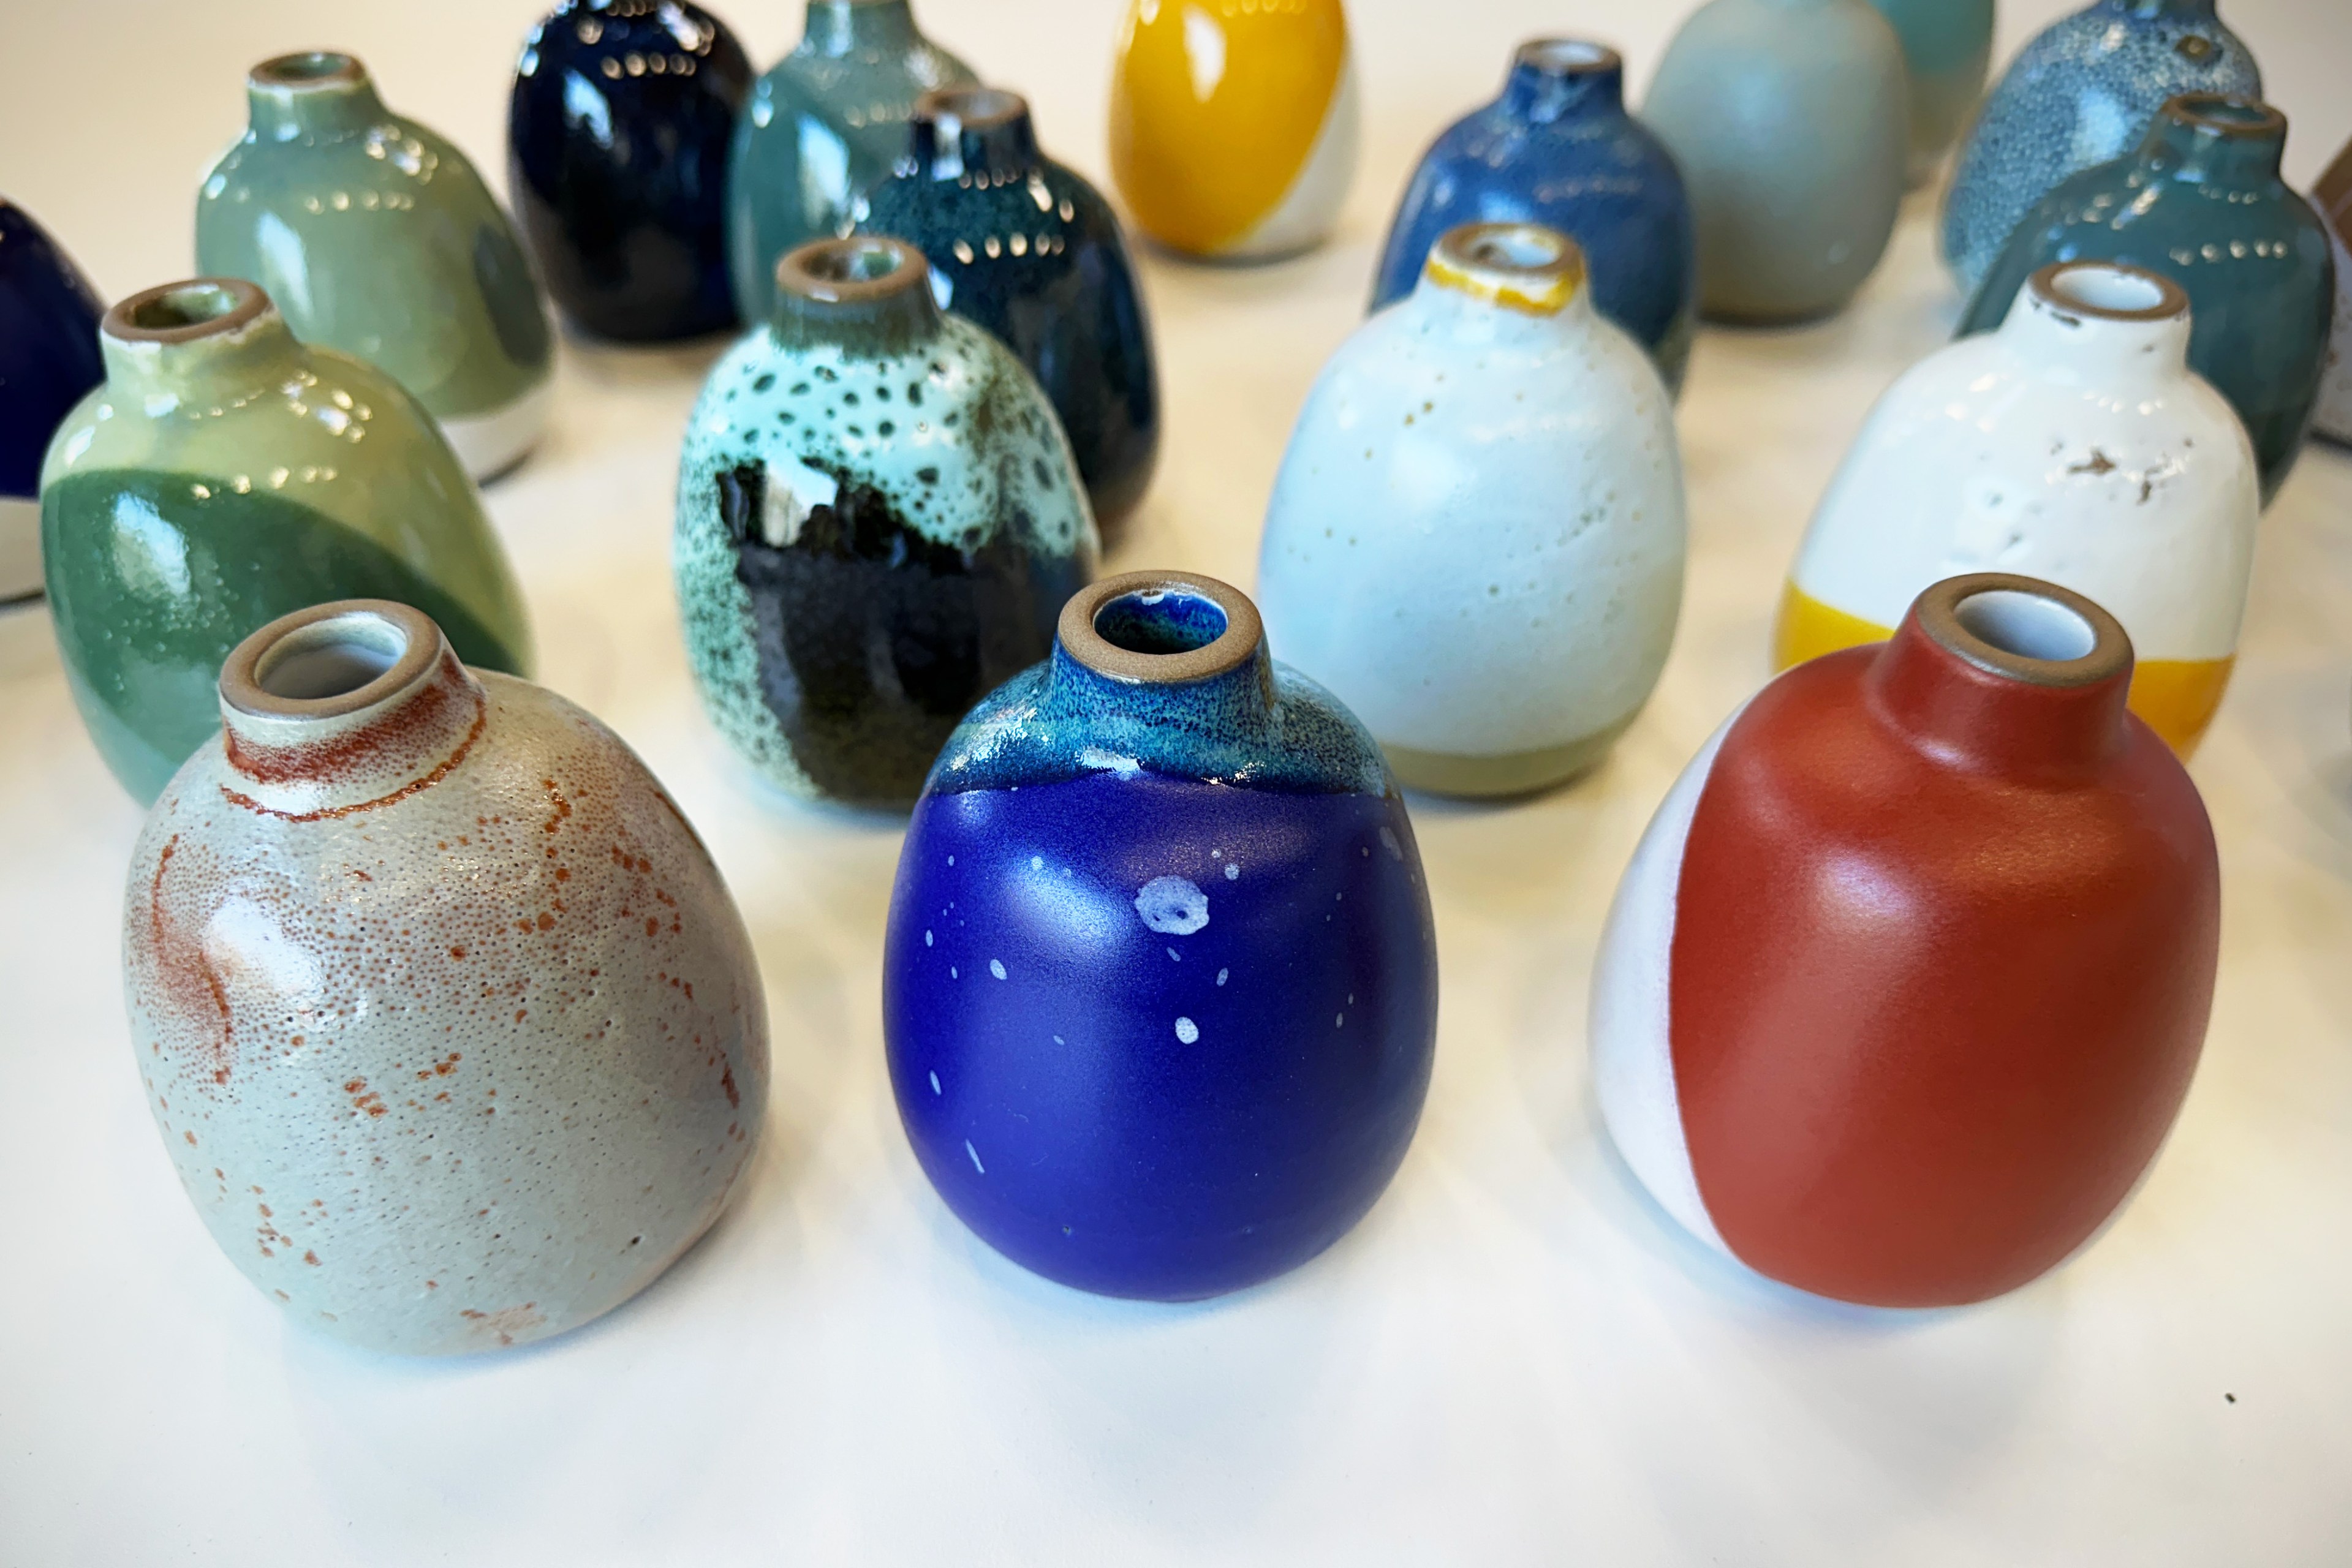 A collection of colorful ceramic vases of various colors sit on a white surface.